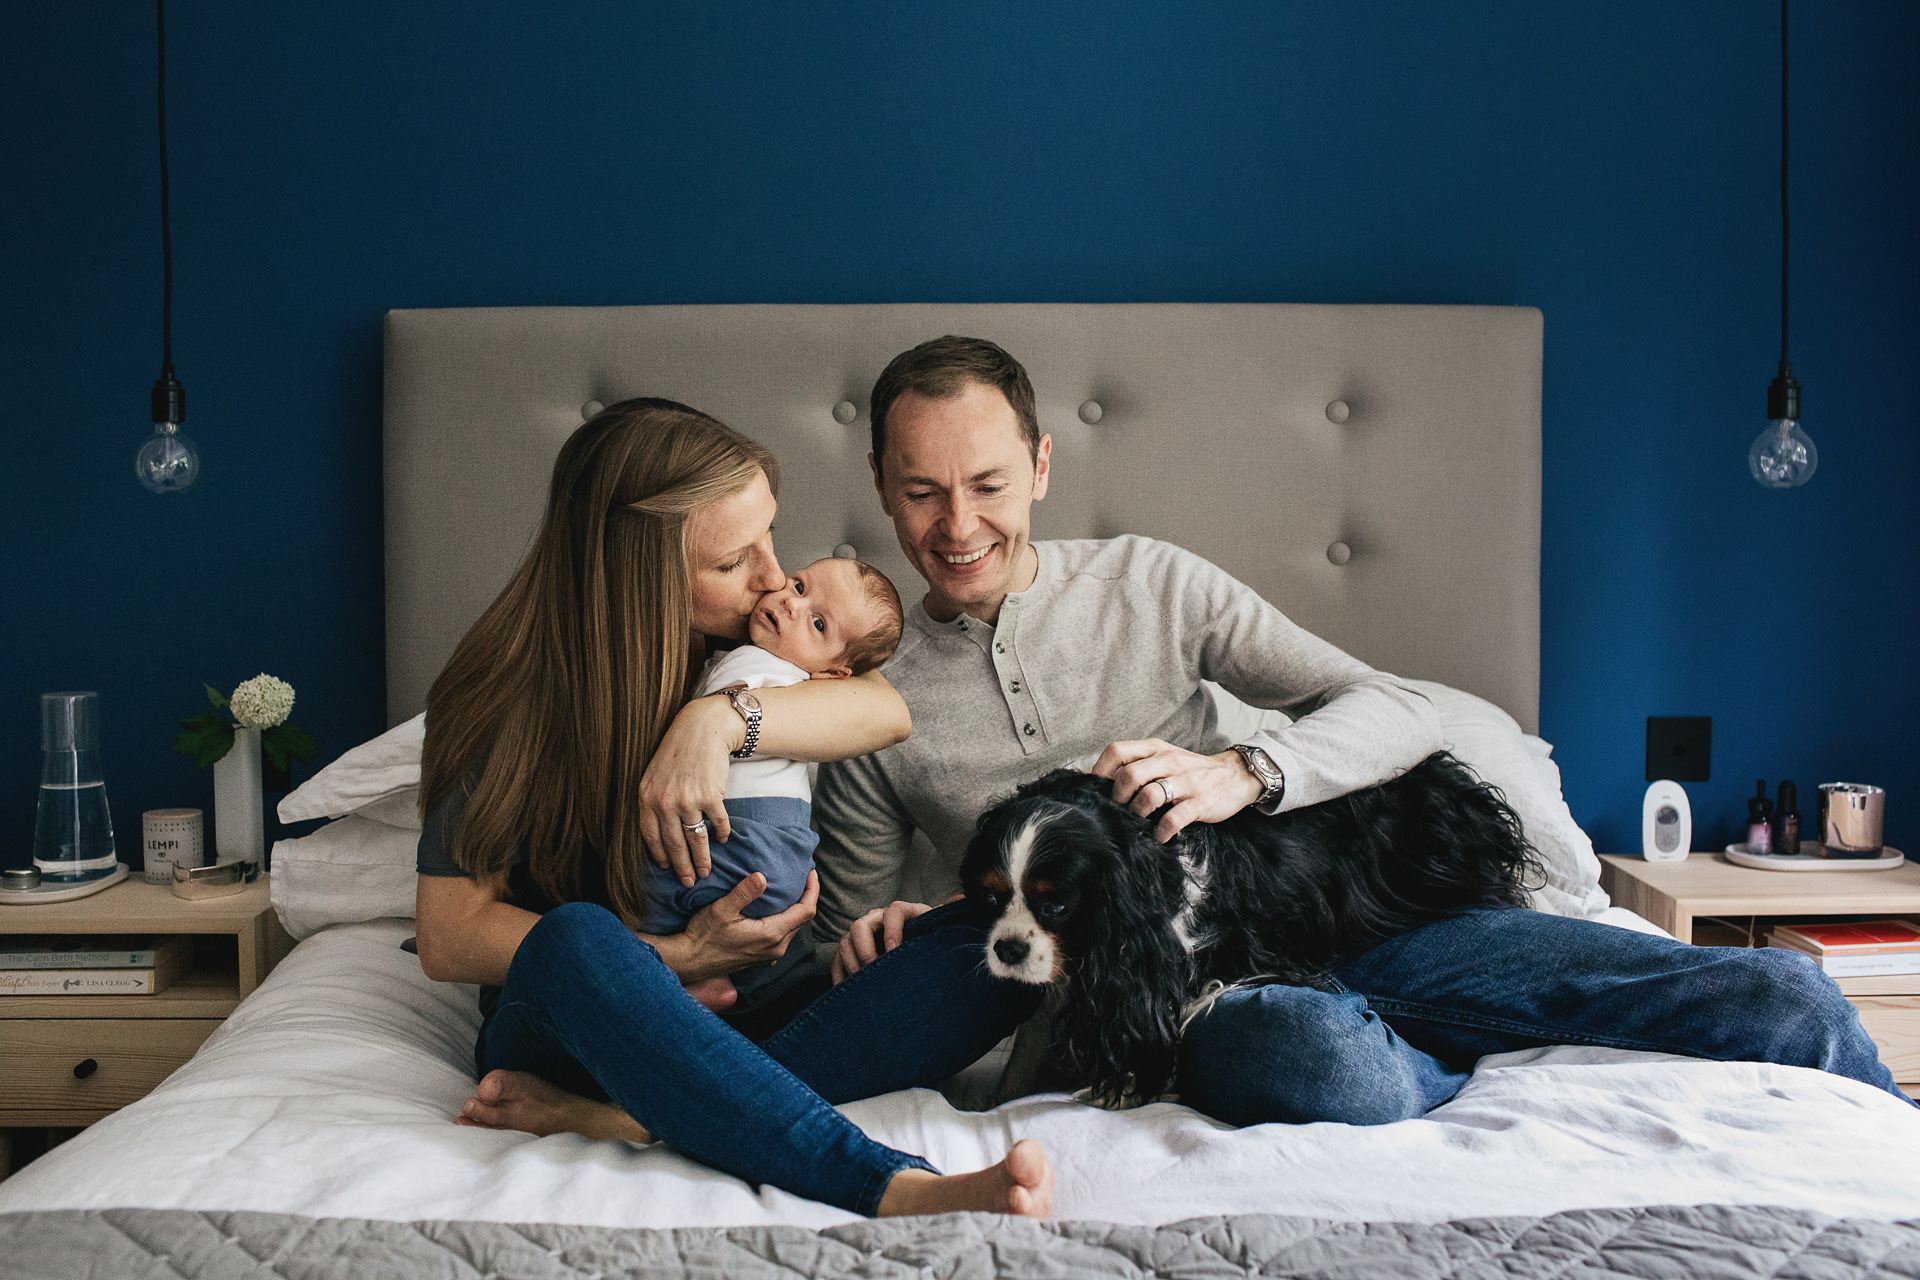 A family with newborn baby together in their bedroom at home with a dog 